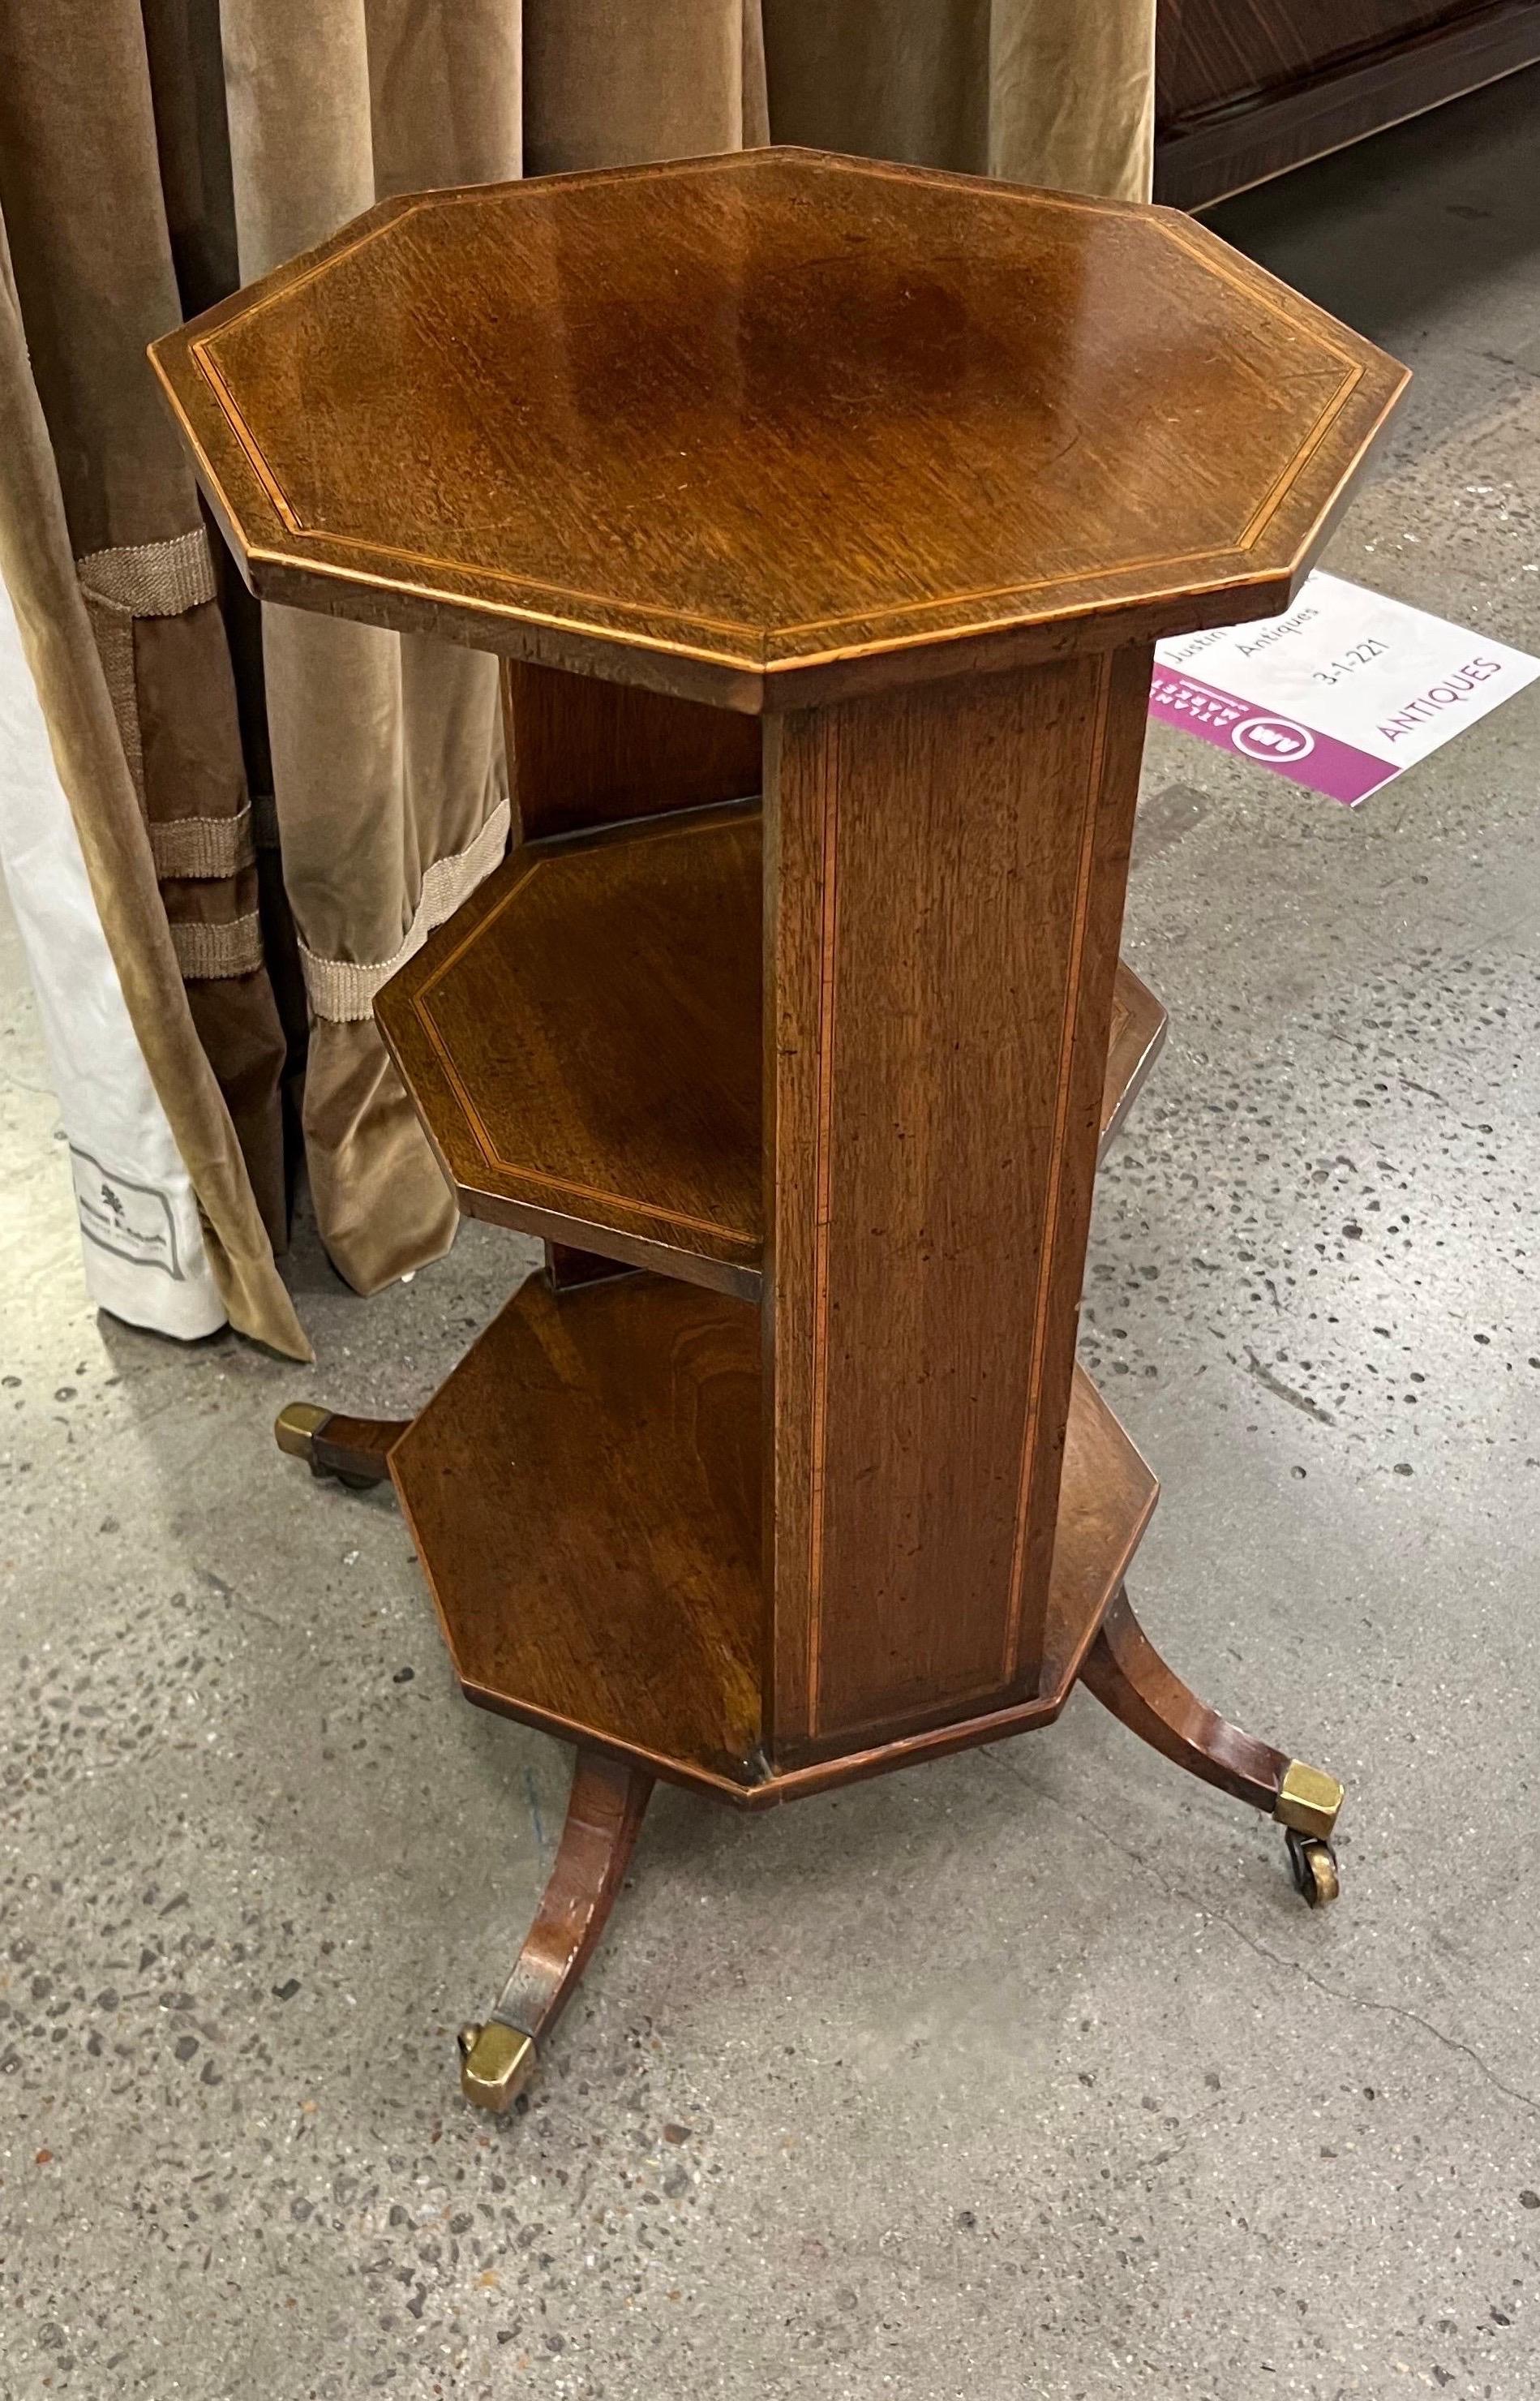 Charming little 19th century English regency inlaid mahogany side table with open shelves.